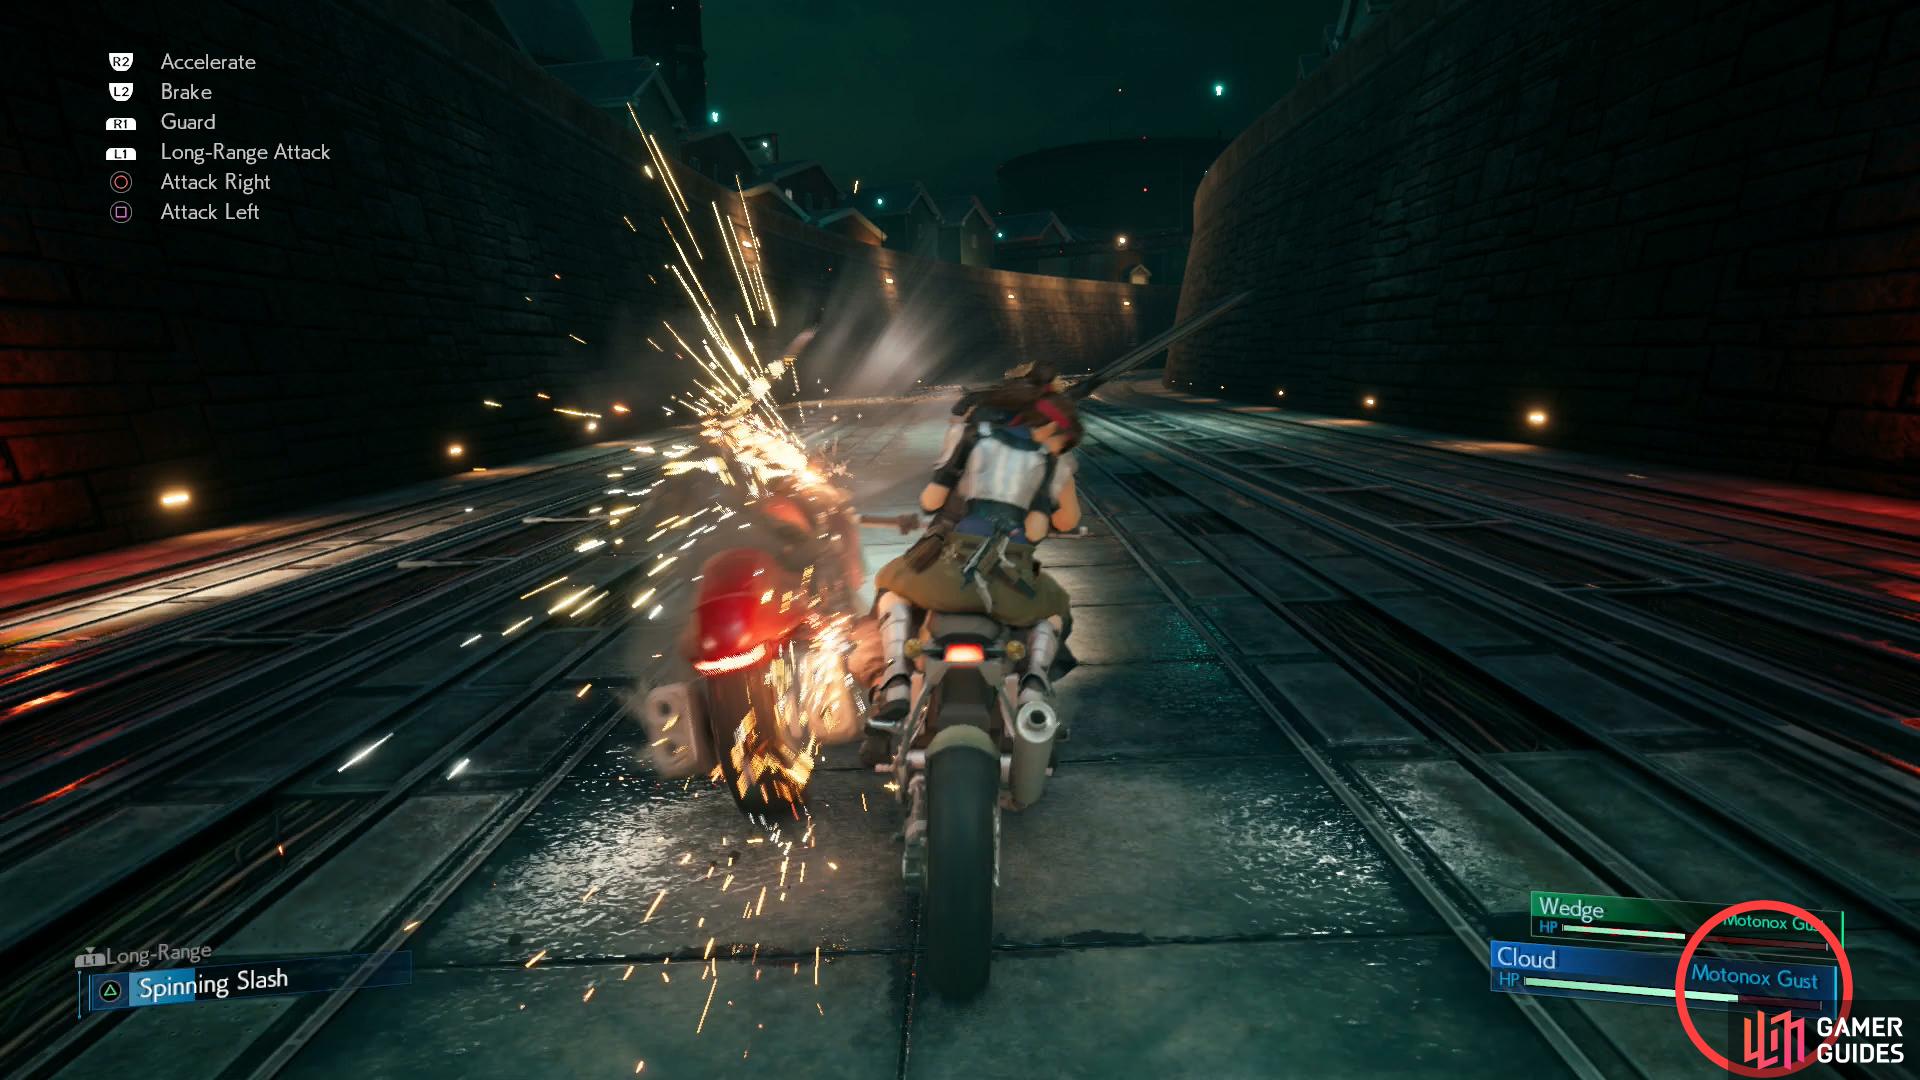 Clear the motorcycle segment with enough HP remaining to secure the “Biker Boy” trophy.